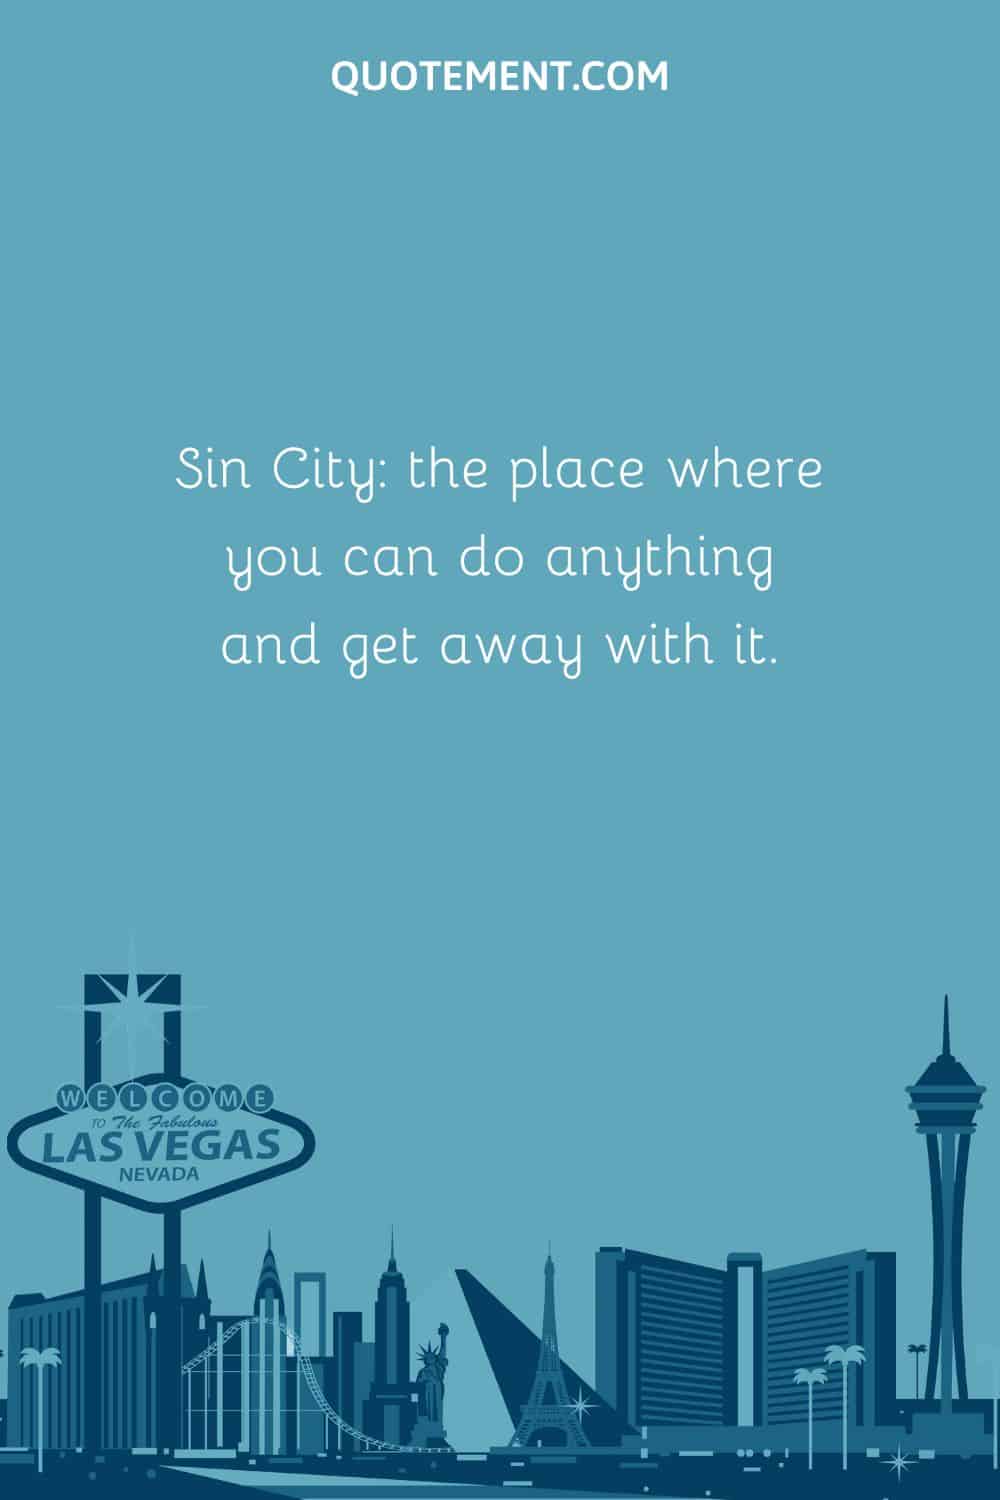 Sin City the place where you can do anything and get away with it.